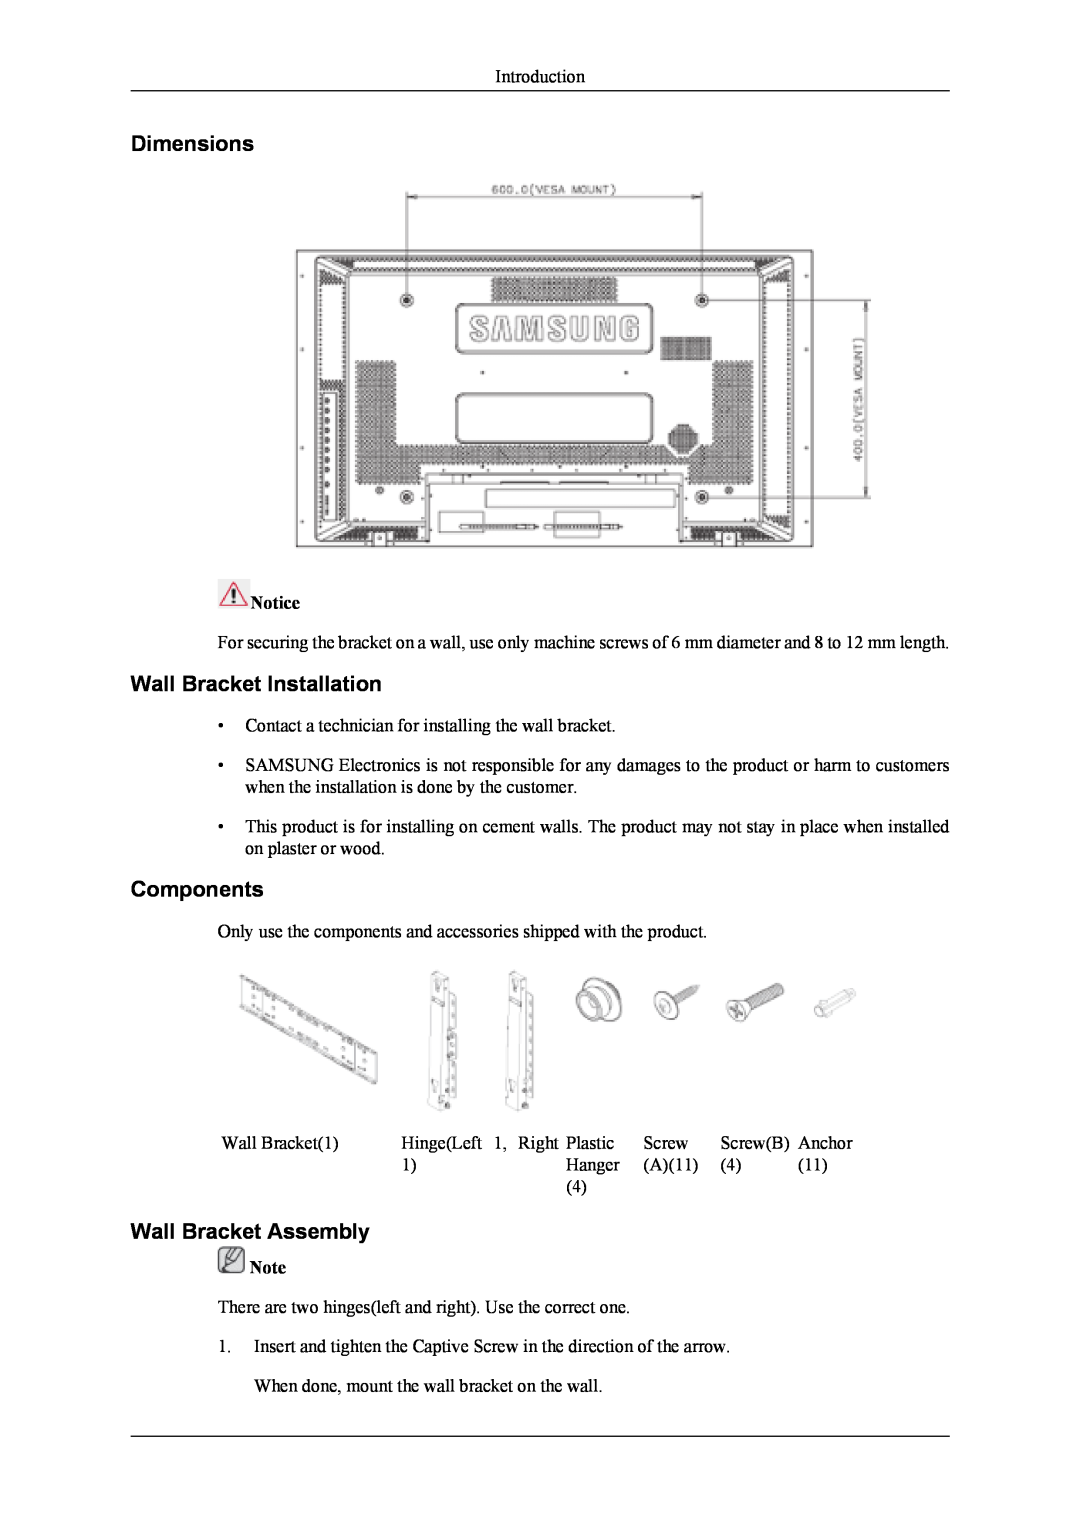 Samsung 400UXn user manual Dimensions, Wall Bracket Installation, Components, Wall Bracket Assembly, Anchor 